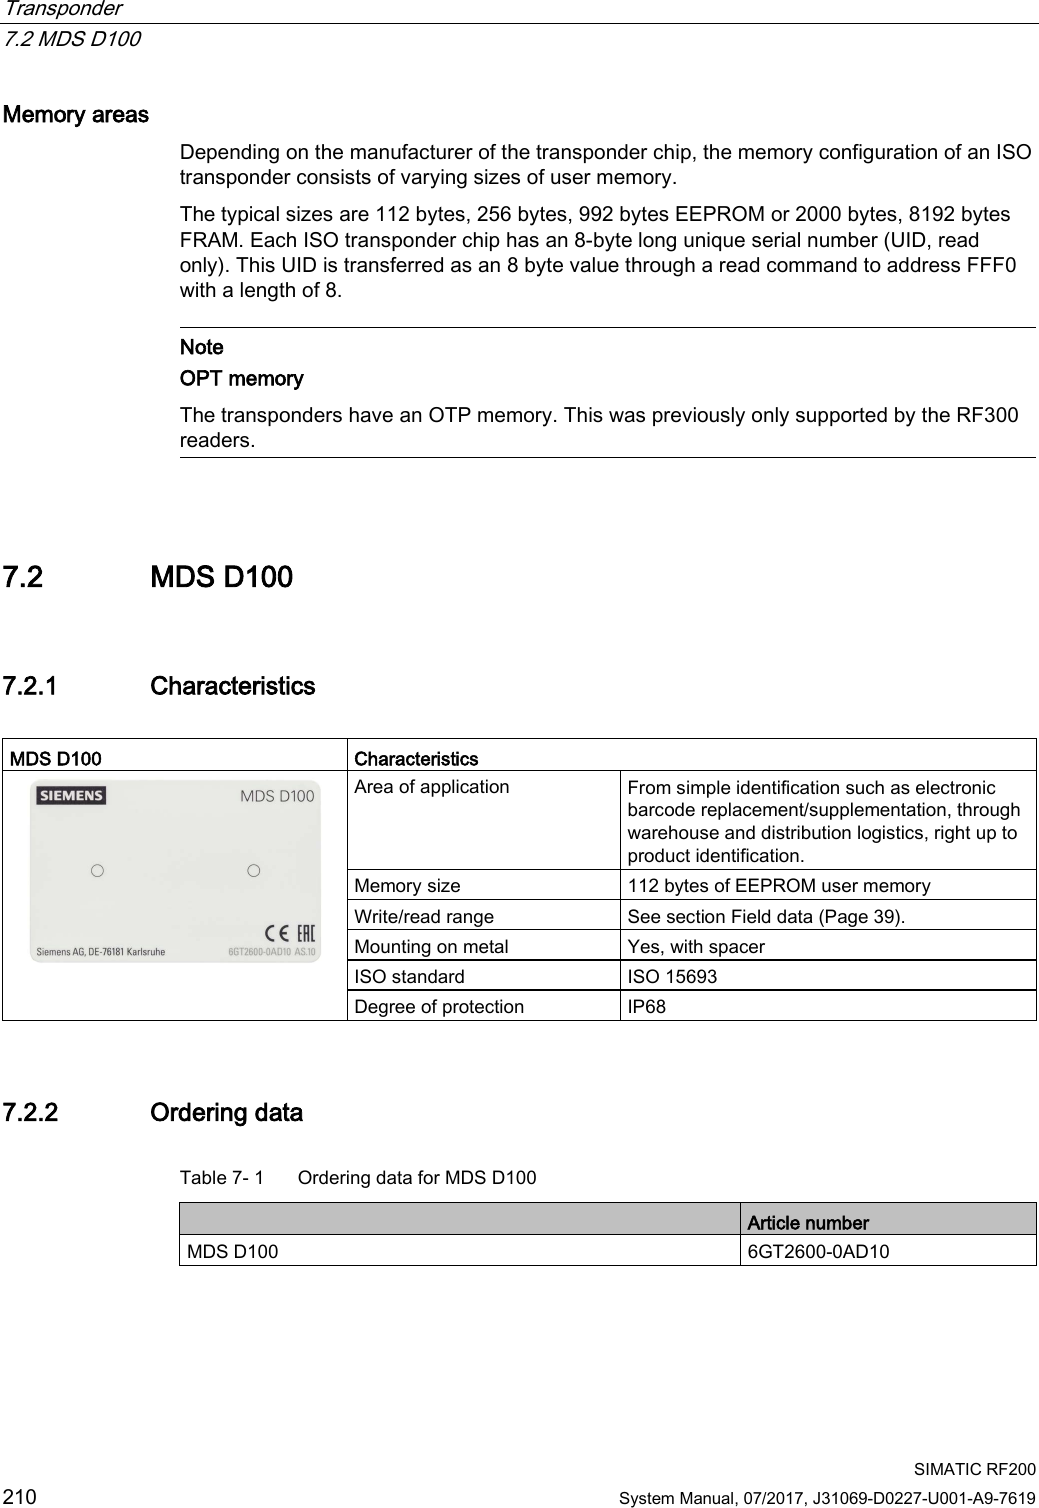 Transponder   7.2 MDS D100  SIMATIC RF200 210 System Manual, 07/2017, J31069-D0227-U001-A9-7619 Memory areas Depending on the manufacturer of the transponder chip, the memory configuration of an ISO transponder consists of varying sizes of user memory. The typical sizes are 112 bytes, 256 bytes, 992 bytes EEPROM or 2000 bytes, 8192 bytes FRAM. Each ISO transponder chip has an 8-byte long unique serial number (UID, read only). This UID is transferred as an 8 byte value through a read command to address FFF0 with a length of 8.   Note OPT memory The transponders have an OTP memory. This was previously only supported by the RF300 readers.  7.2 MDS D100 7.2.1 Characteristics  MDS D100 Characteristics  Area of application From simple identification such as electronic barcode replacement/supplementation, through warehouse and distribution logistics, right up to product identification. Memory size 112 bytes of EEPROM user memory Write/read range See section Field data (Page 39). Mounting on metal Yes, with spacer ISO standard ISO 15693 Degree of protection IP68 7.2.2 Ordering data Table 7- 1  Ordering data for MDS D100  Article number MDS D100 6GT2600-0AD10  